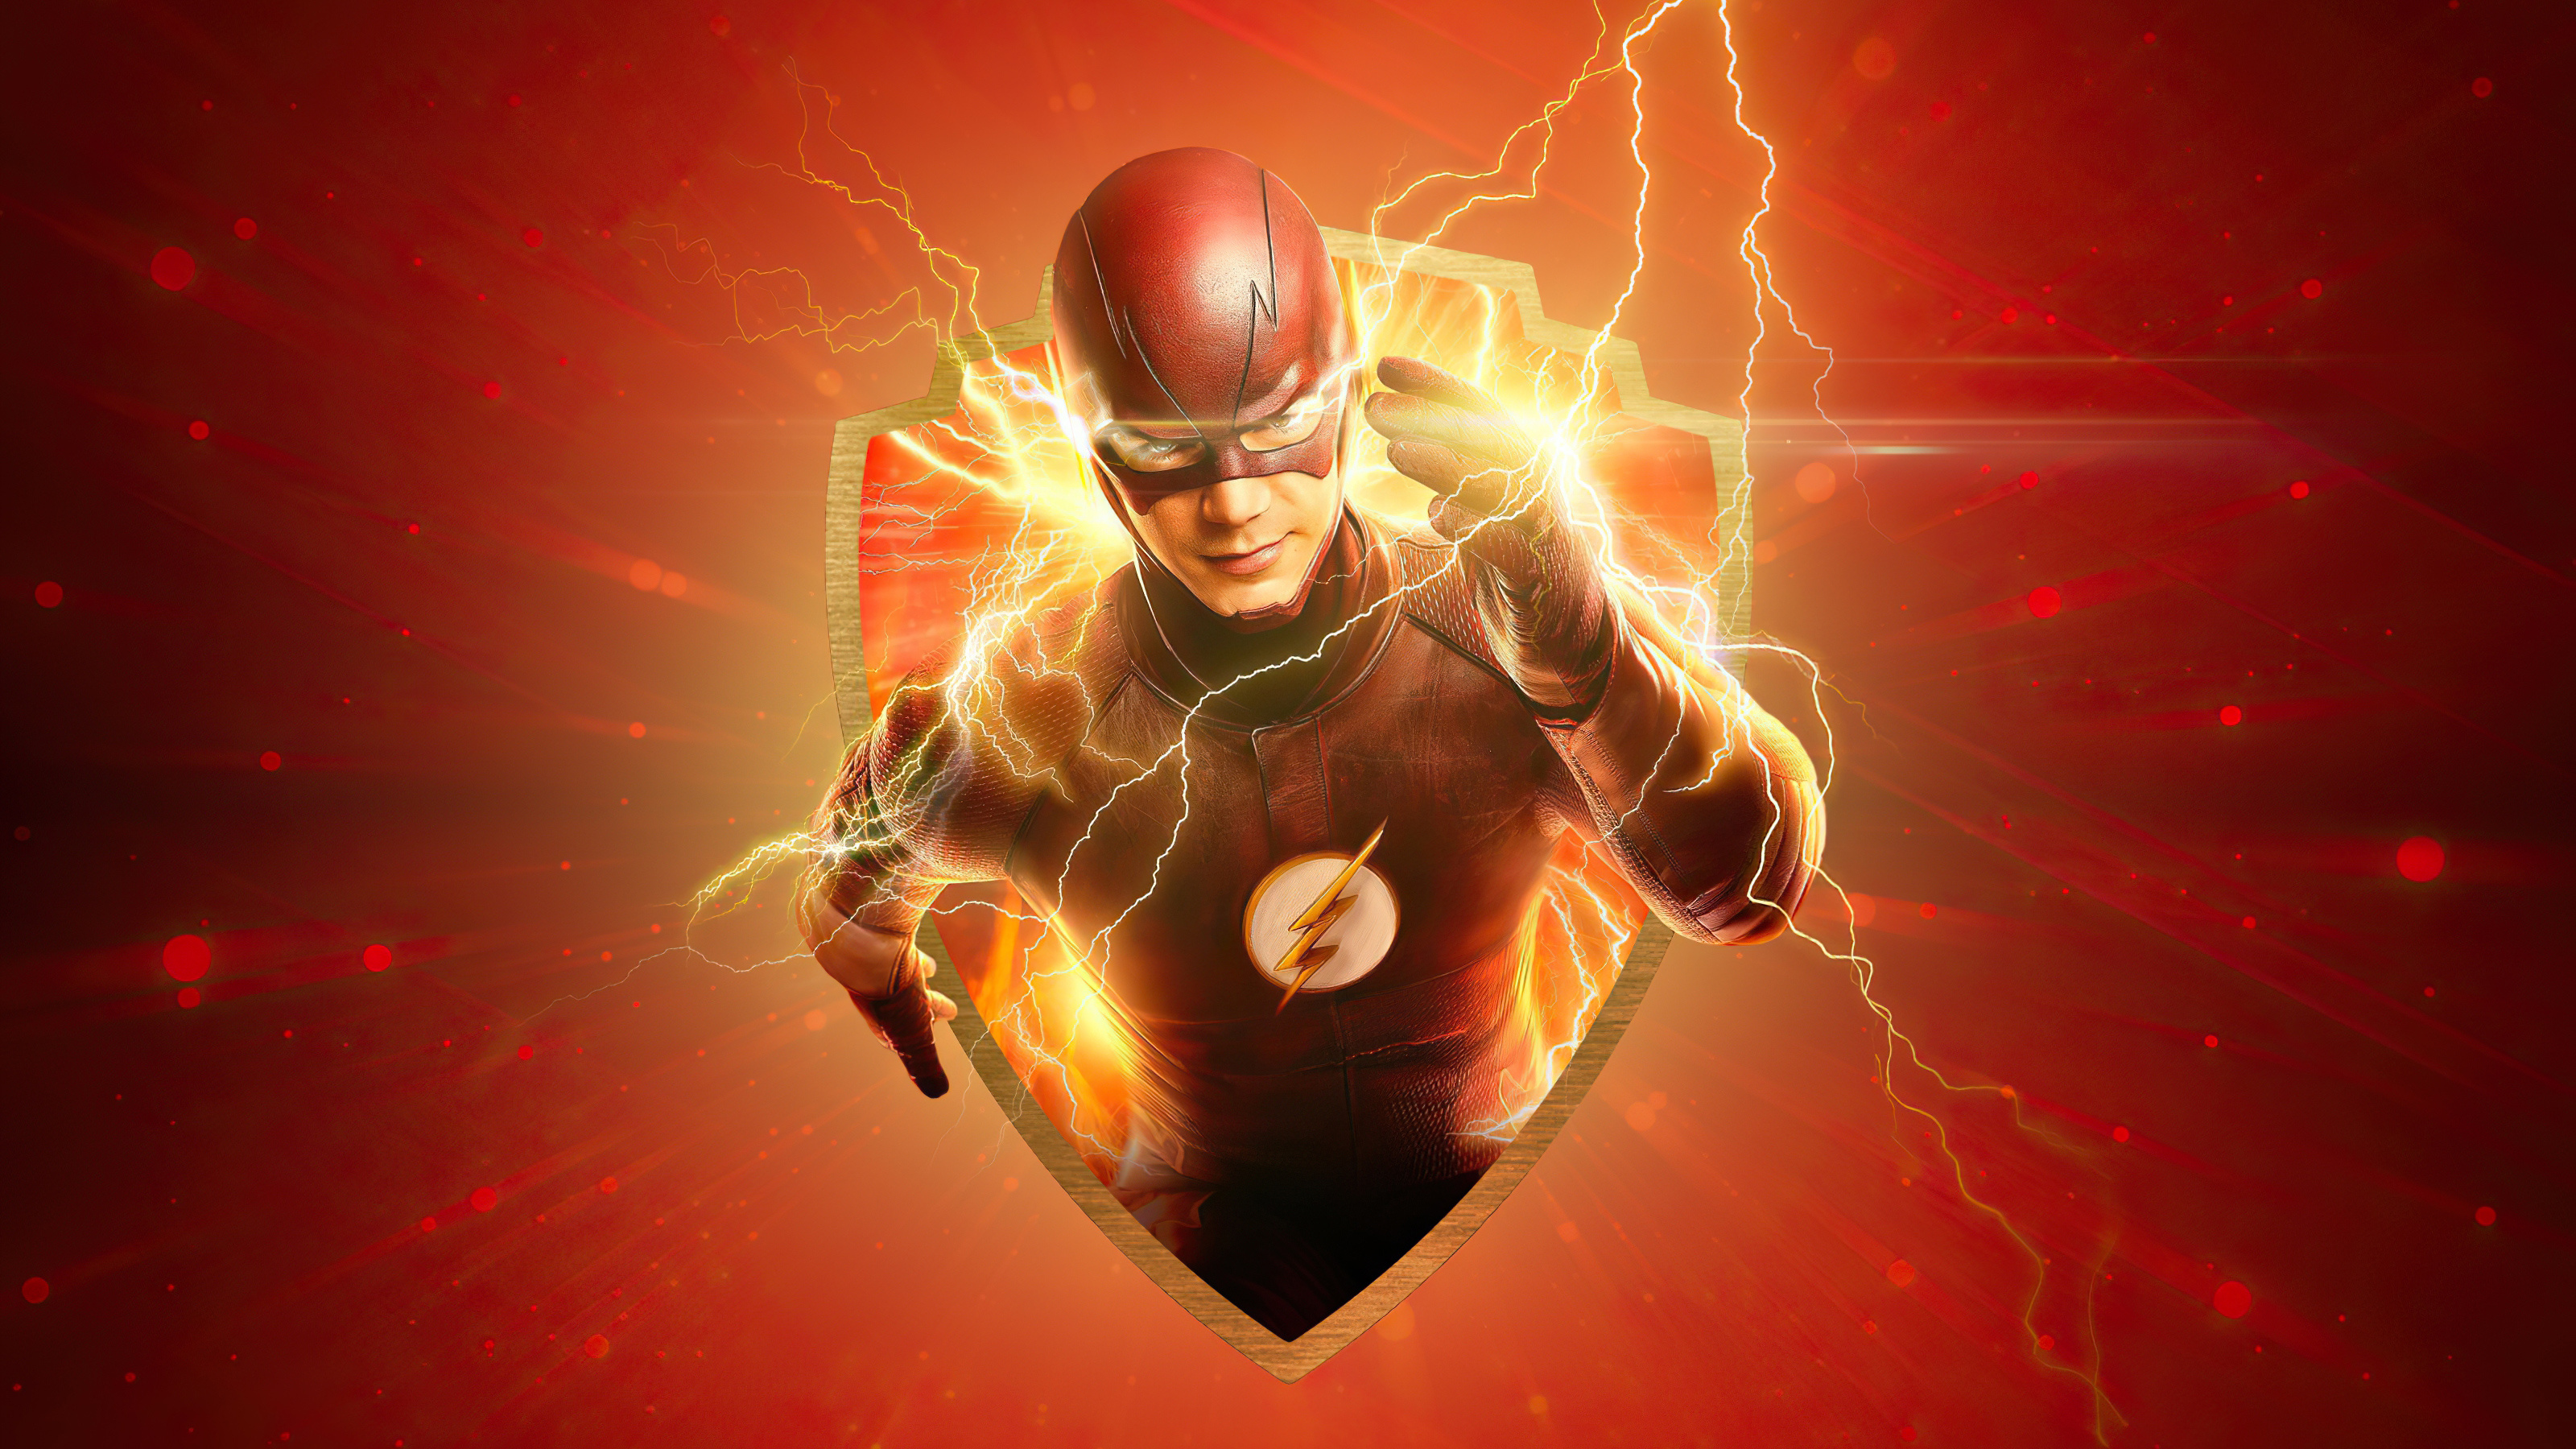 Grant Gustin: Flash, A speedster, Barry Allen, A fictional character in The CW's Arrowverse franchise. 3200x1800 HD Wallpaper.